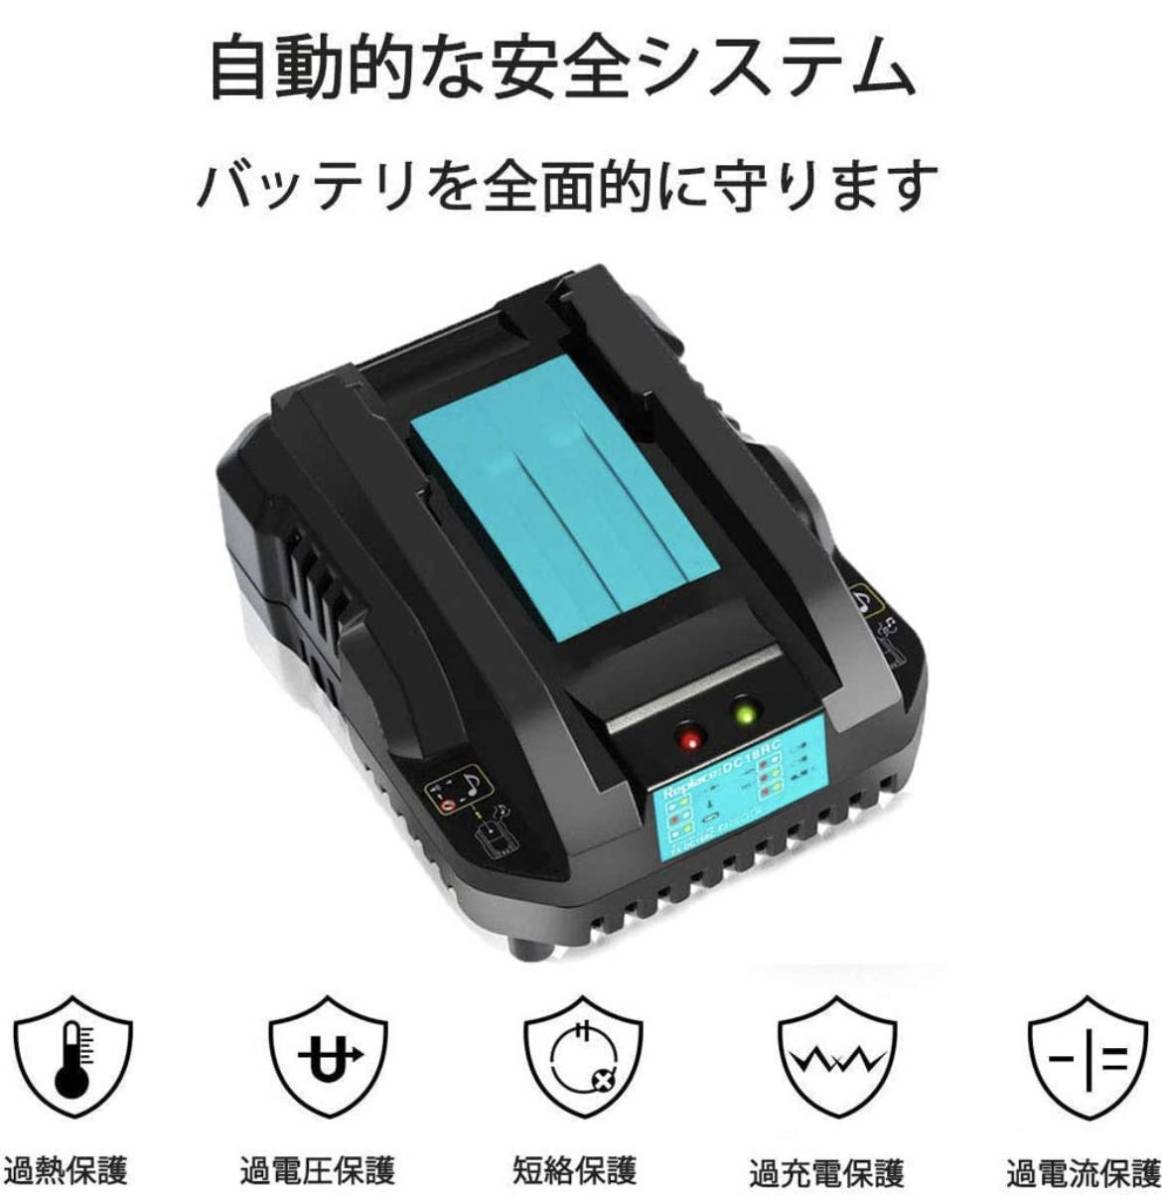  Makita interchangeable charger DC18RC fast charger interchangeable goods makita Makita charger ( small size type ) 14.4v 18v correspondence S rank 